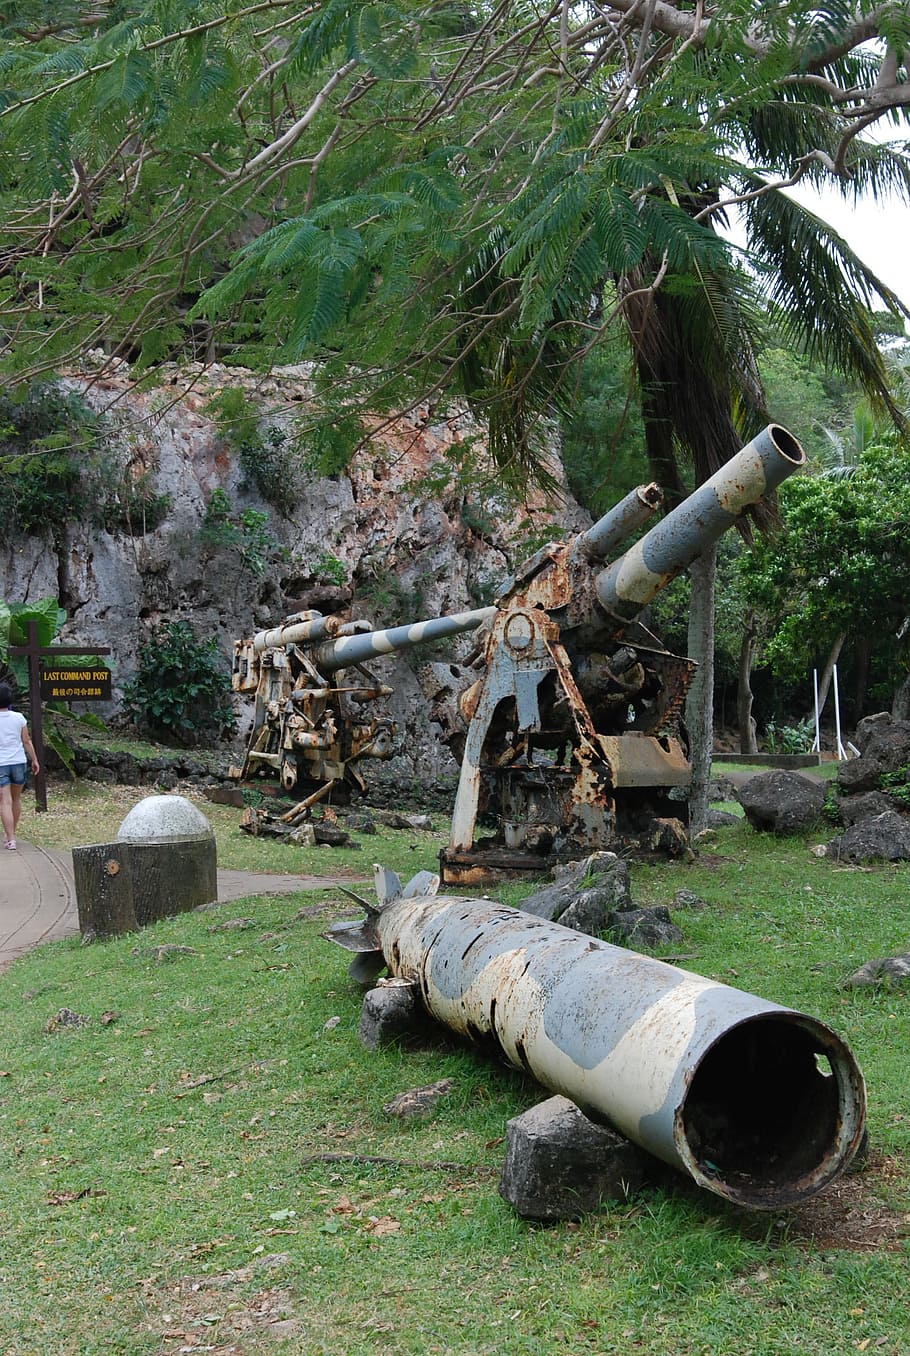 Cannon, Artillery, Rusted, Old, Military, weapon, historical, attraction, display, war